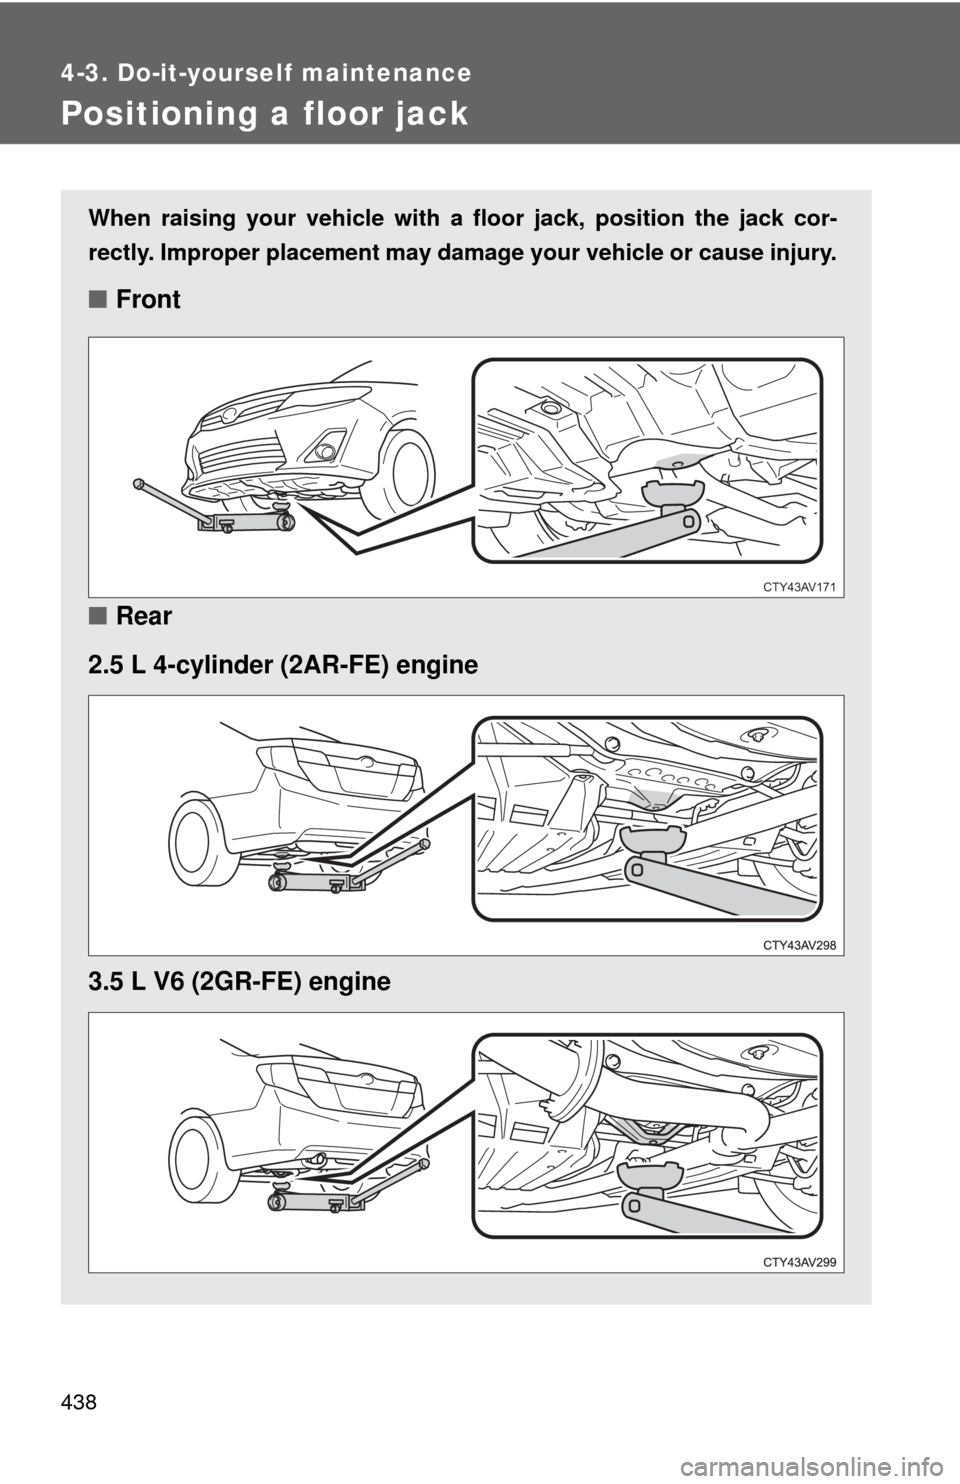 TOYOTA CAMRY 2014 XV50 / 9.G Owners Manual 438
4-3. Do-it-yourself maintenance
Positioning a floor jack
When raising your vehicle with a floor jack, position the jack cor-
rectly. Improper placement may damage your vehicle or cause injury.
■